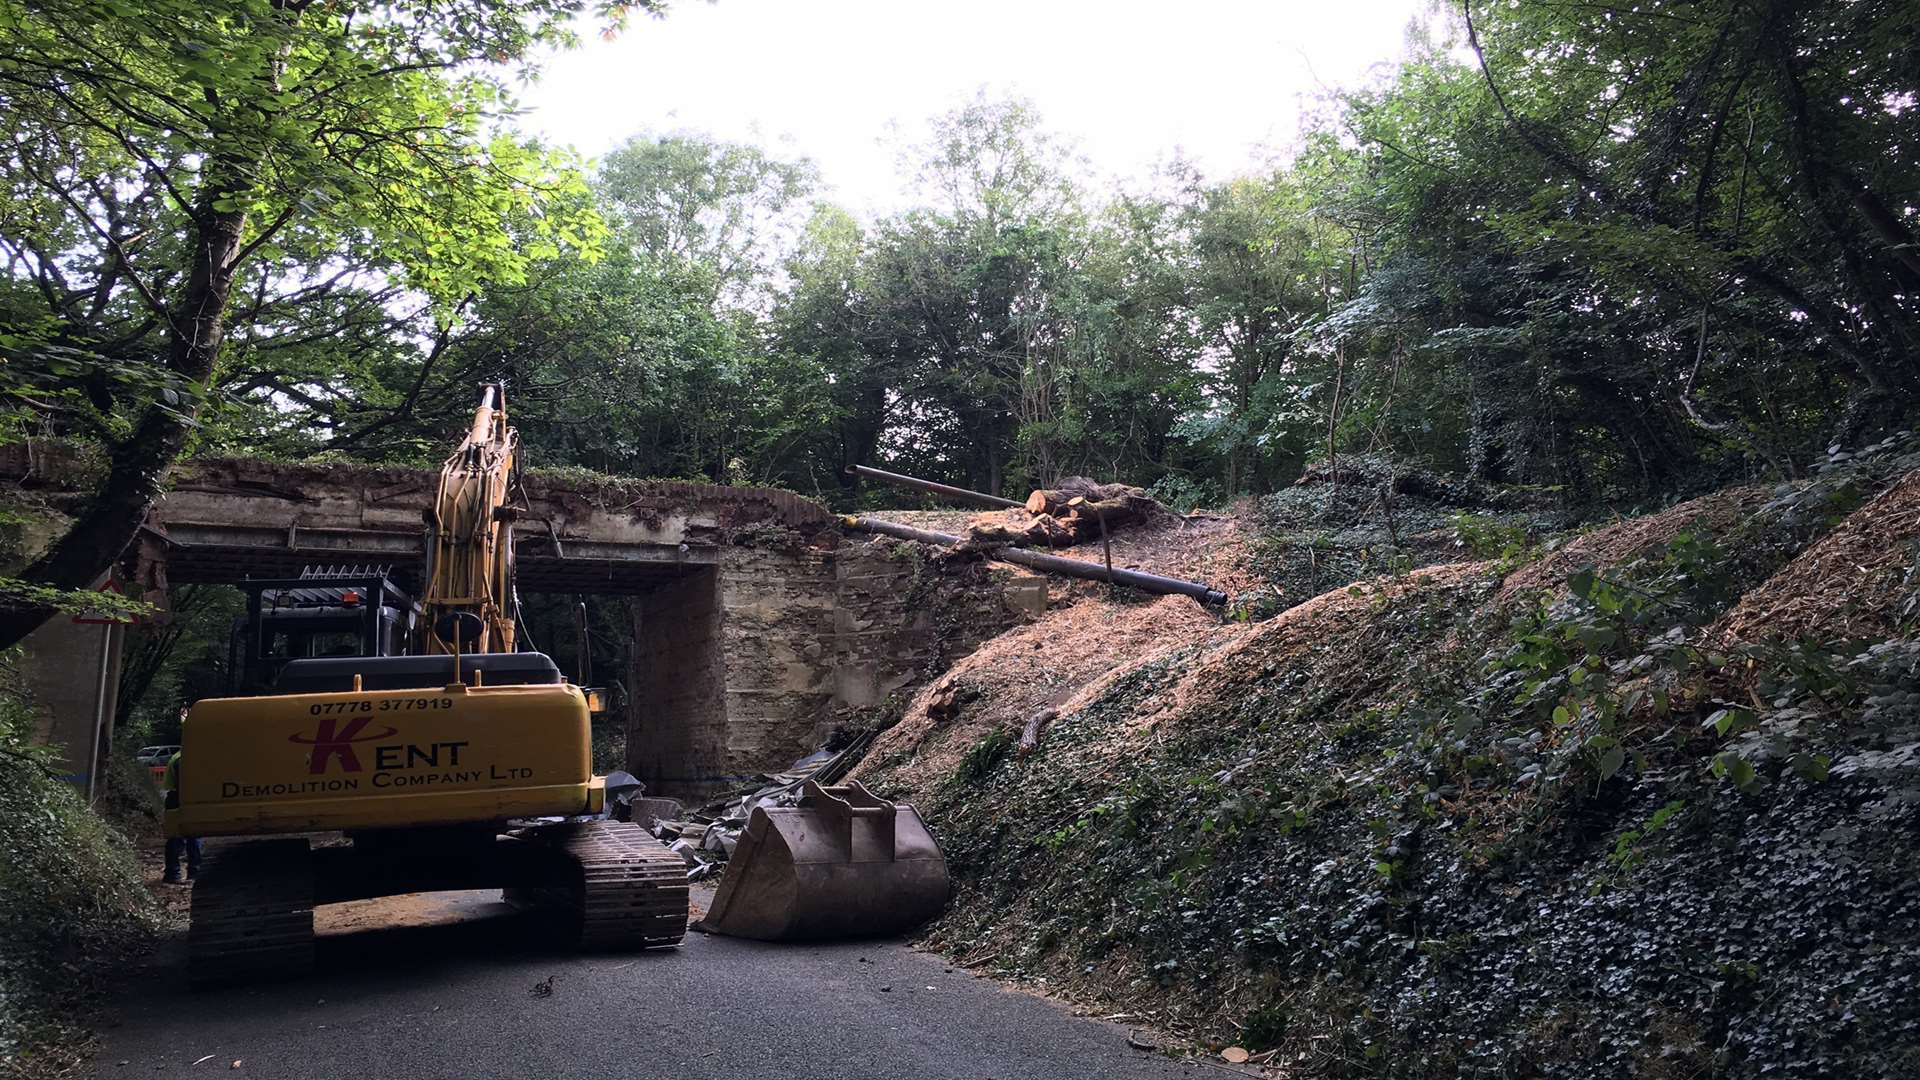 The Thong Lane bridge, which is being demolished